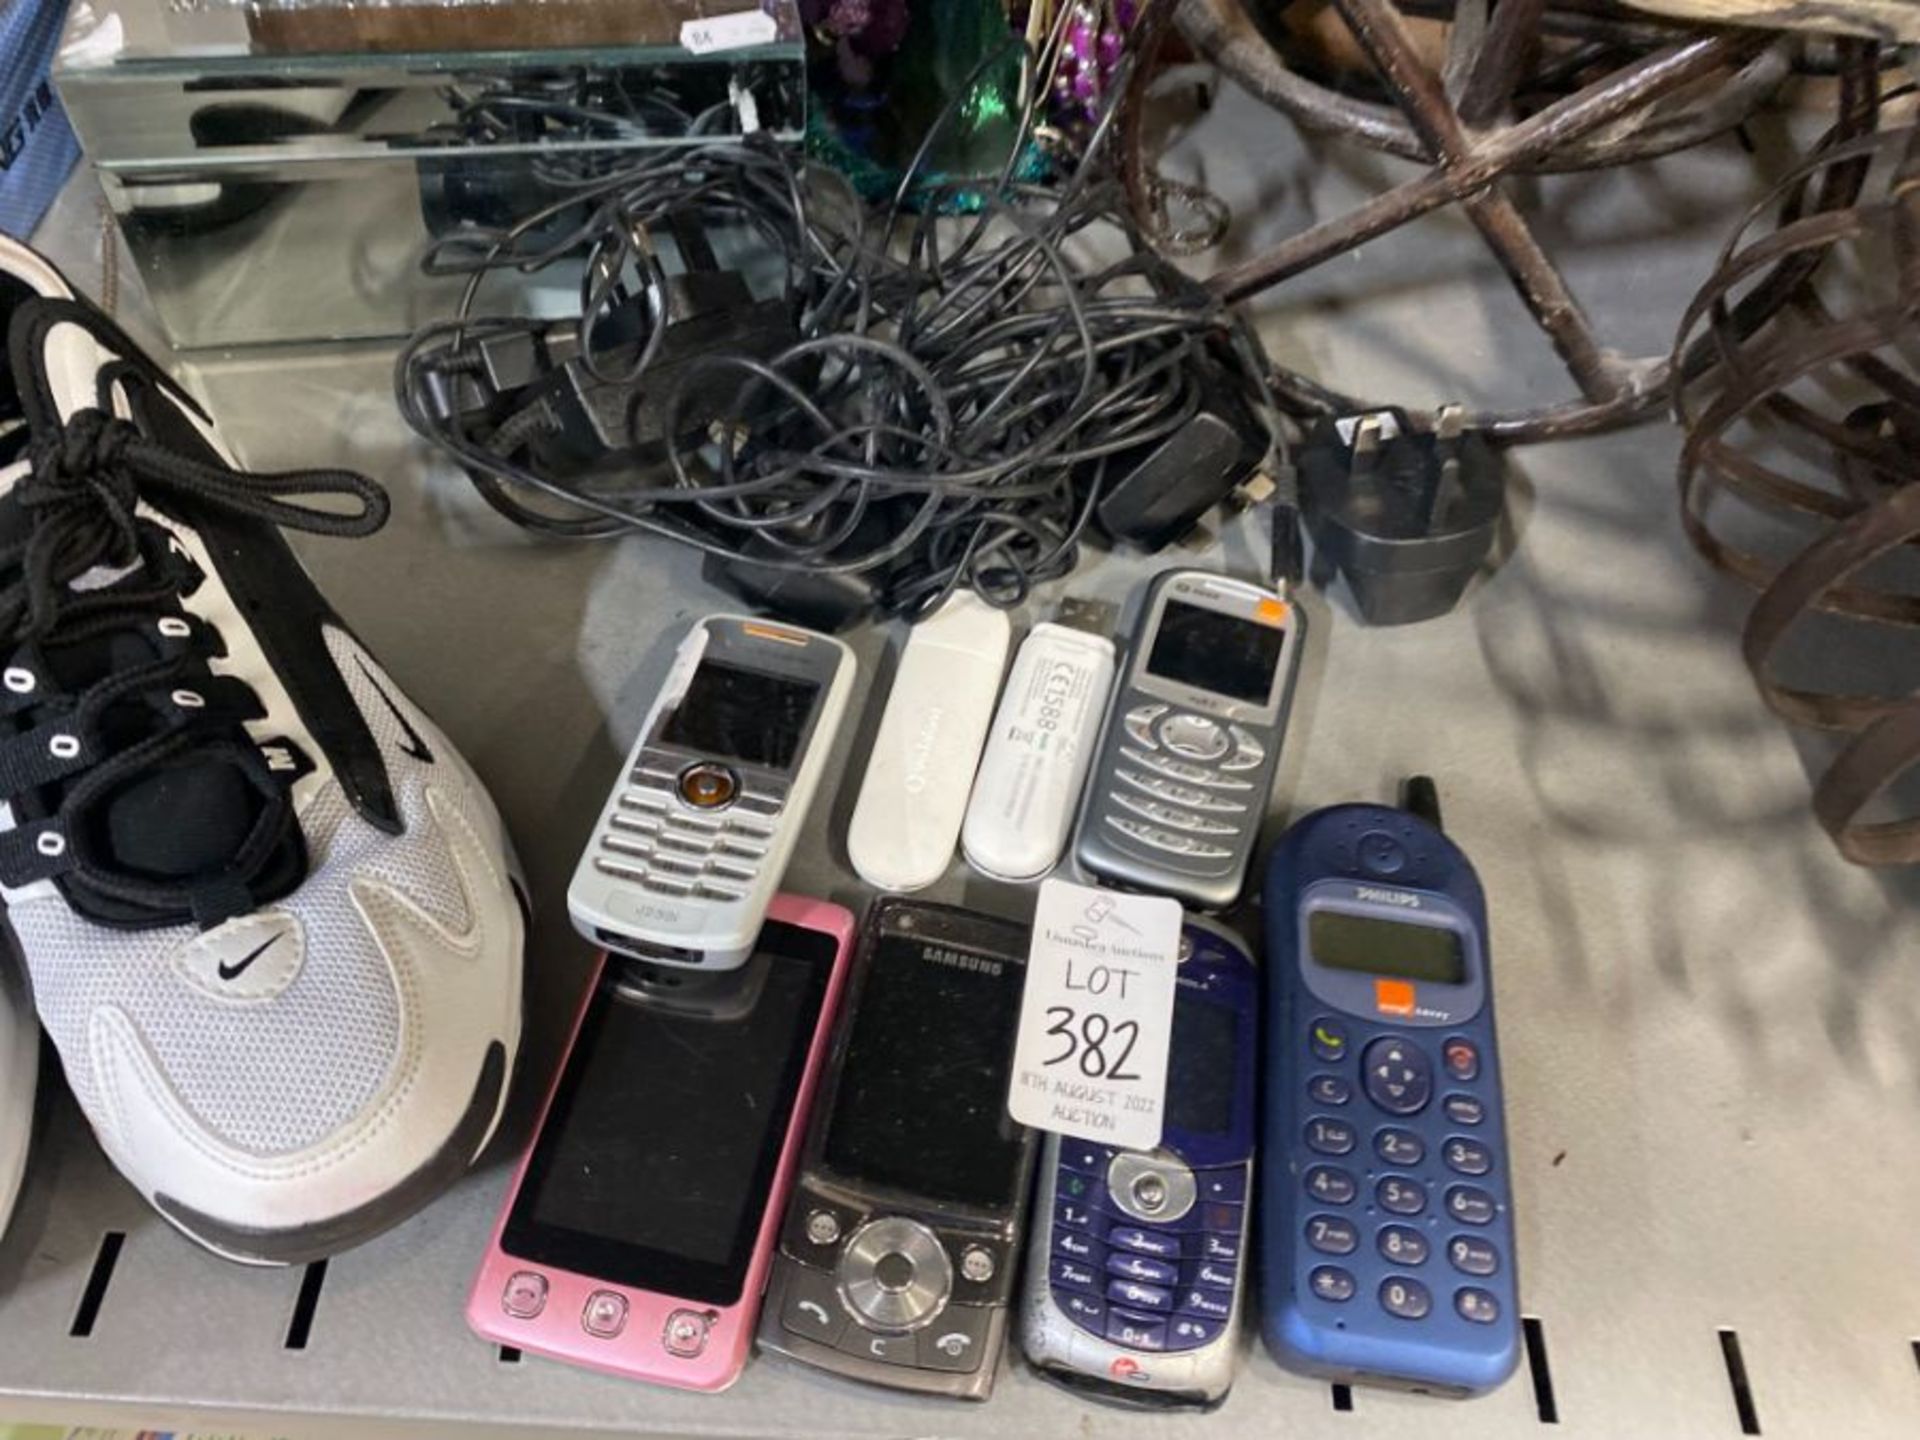 BUNDLE OF 6X MOBILE PHONES & 2X DONGLES